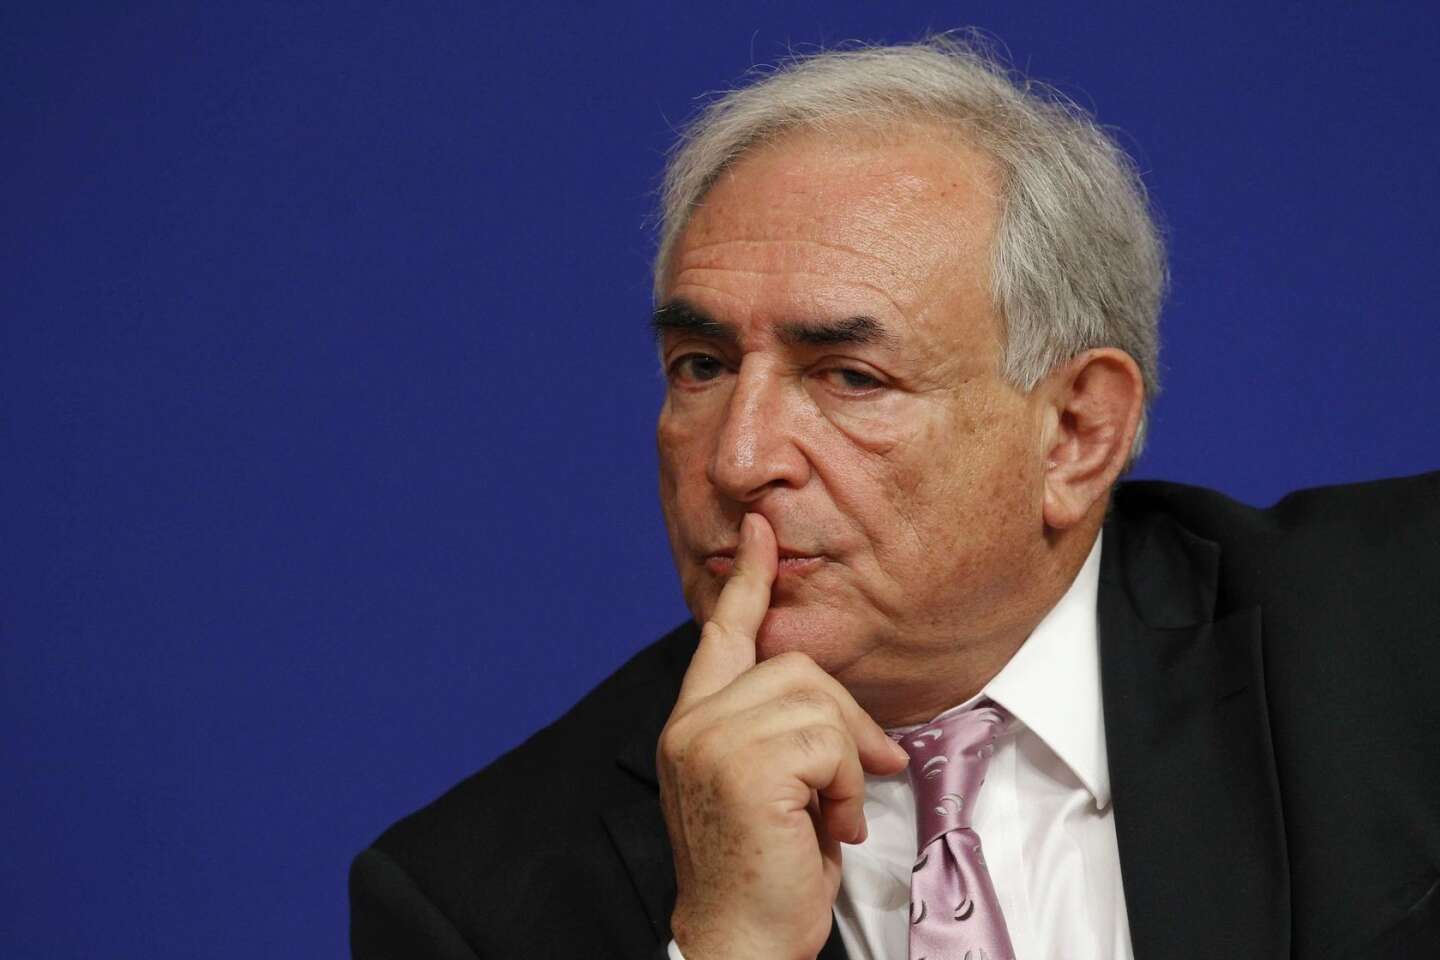 18 Enigmatic Facts About Dominique Strauss-Kahn - Facts.net